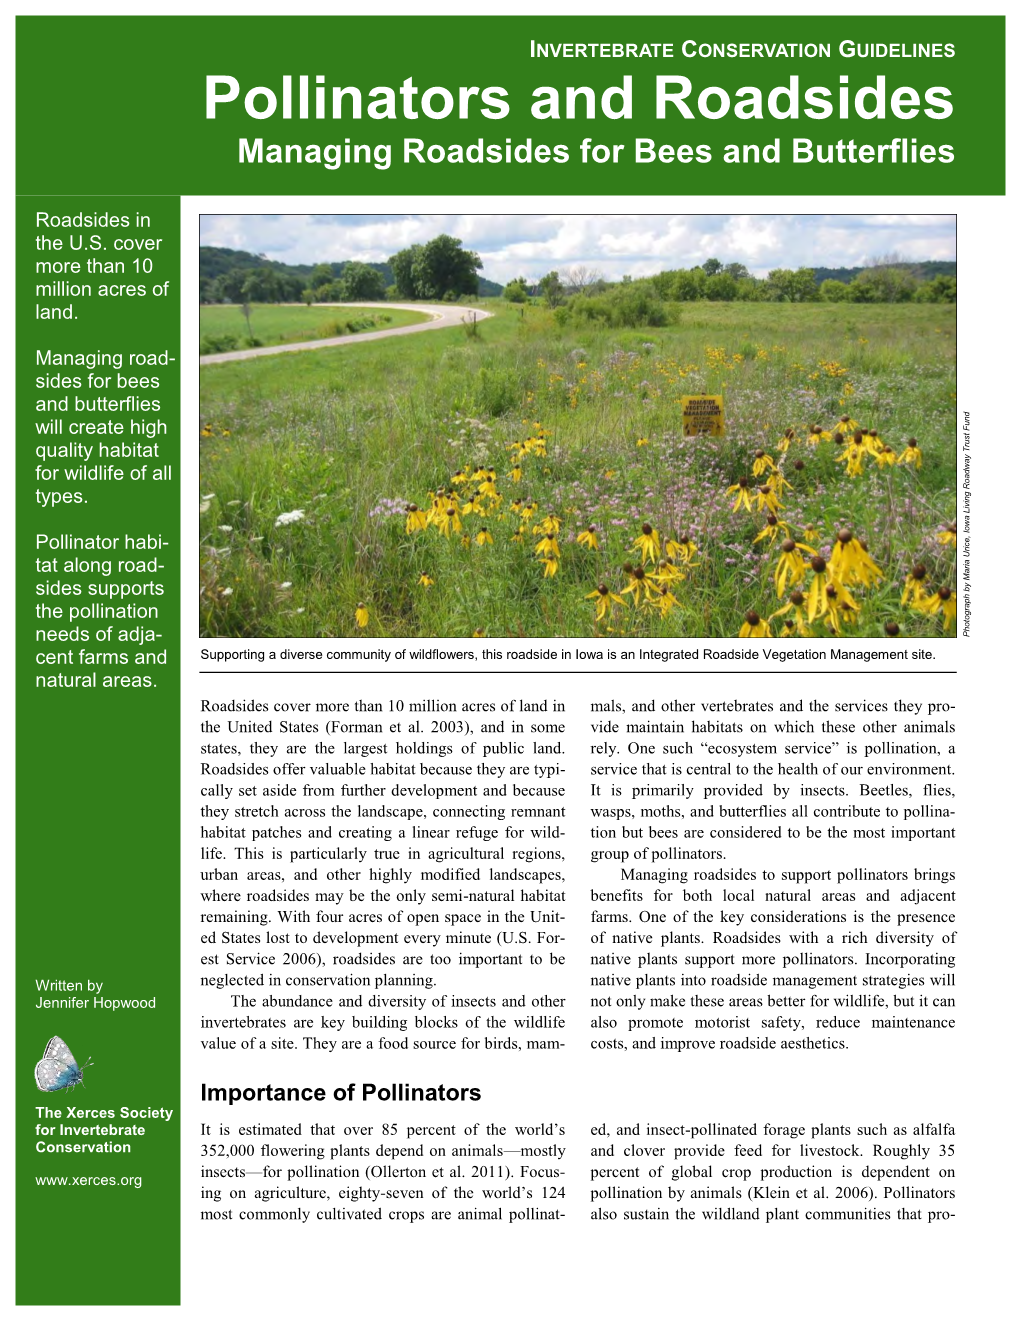 Pollinators and Roadsides Managing Roadsides for Bees and Butterflies